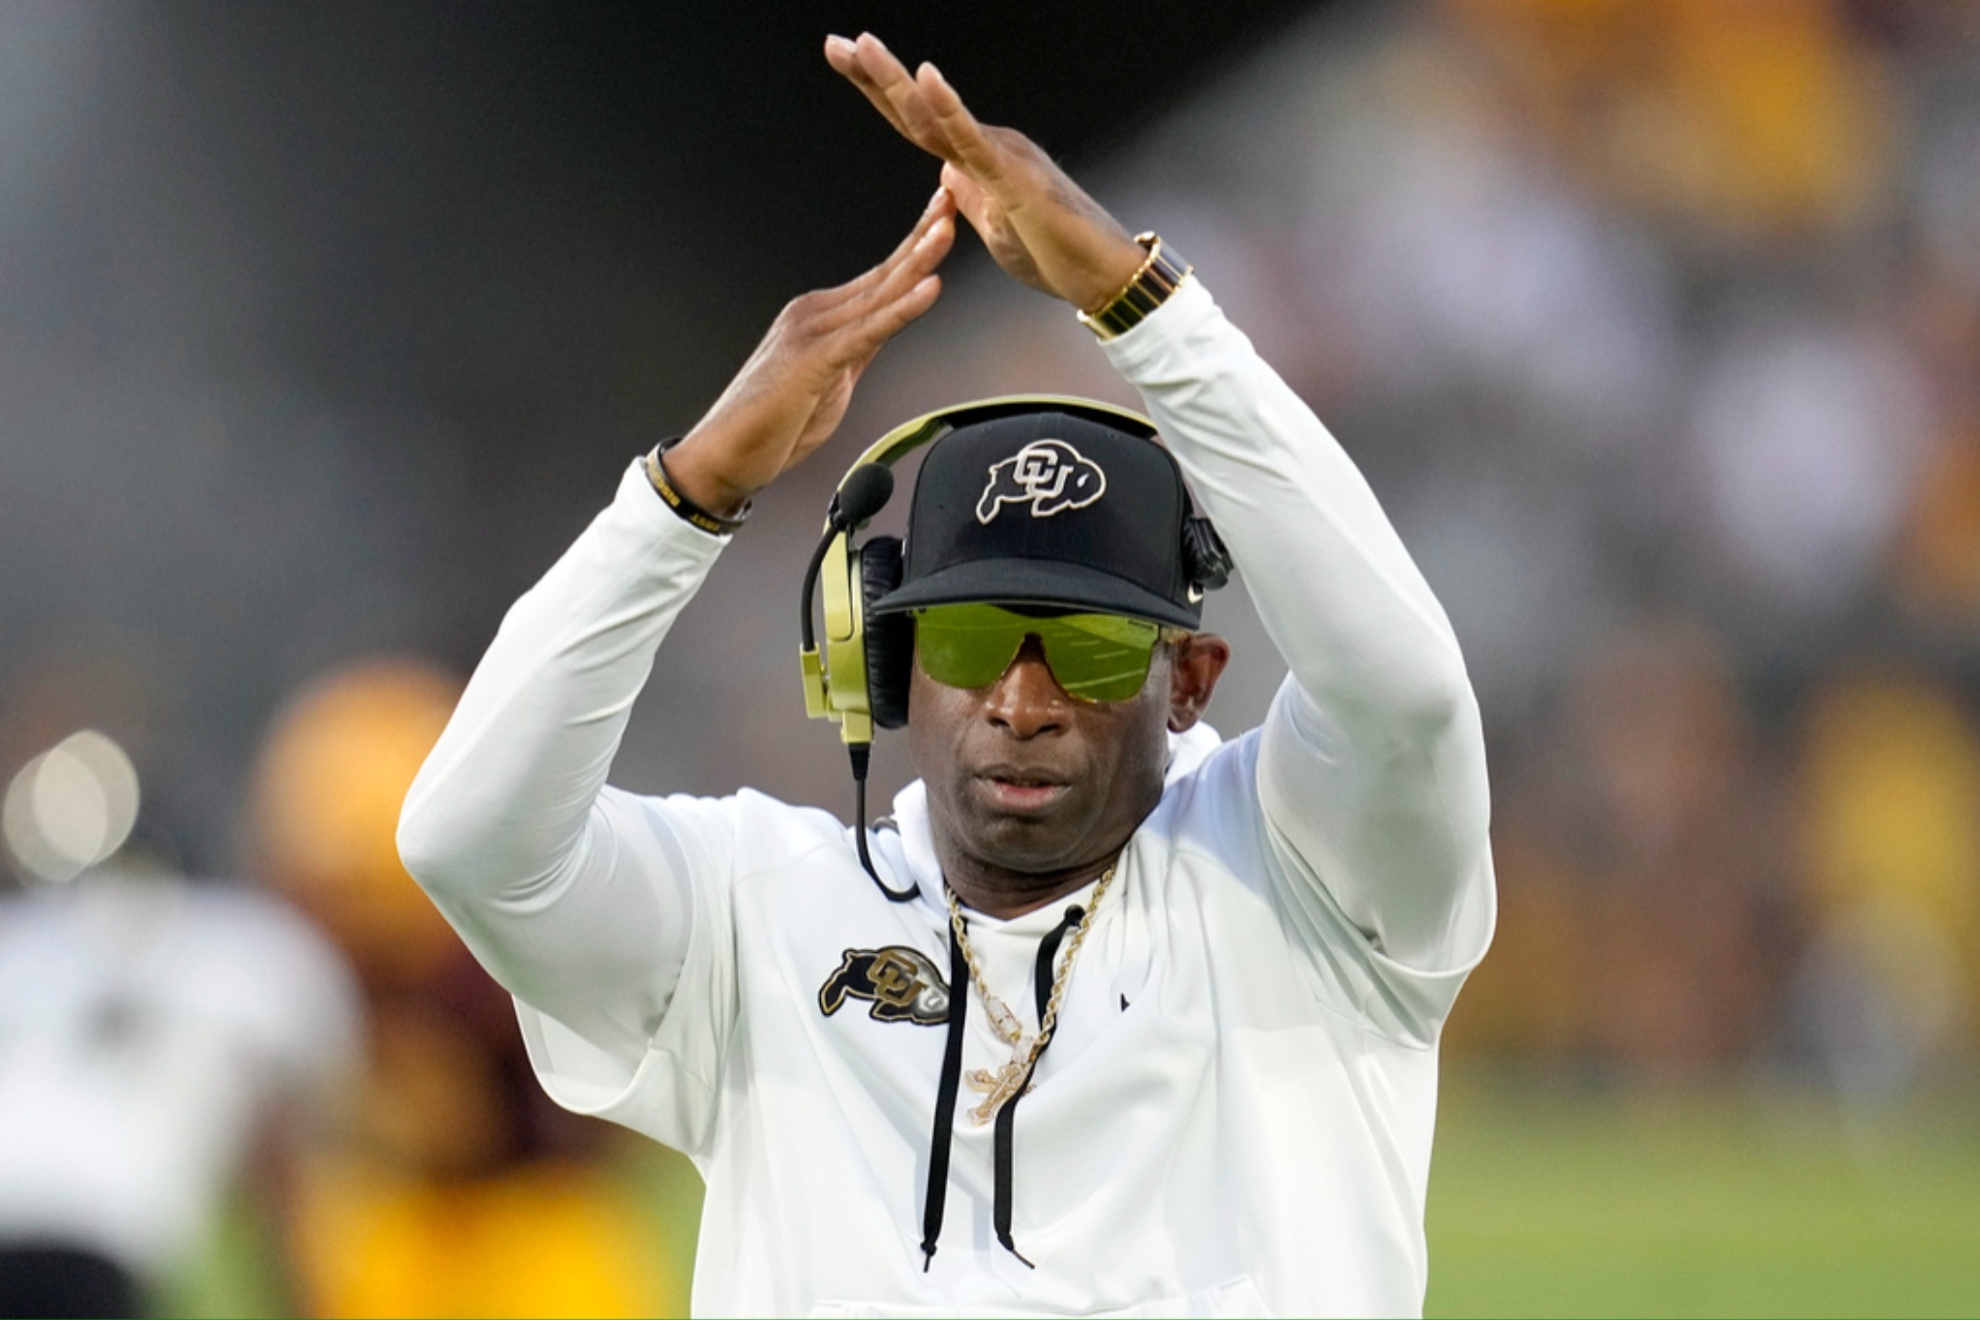 Deion Sanders during the game against Arizona State on Oct. 2023.